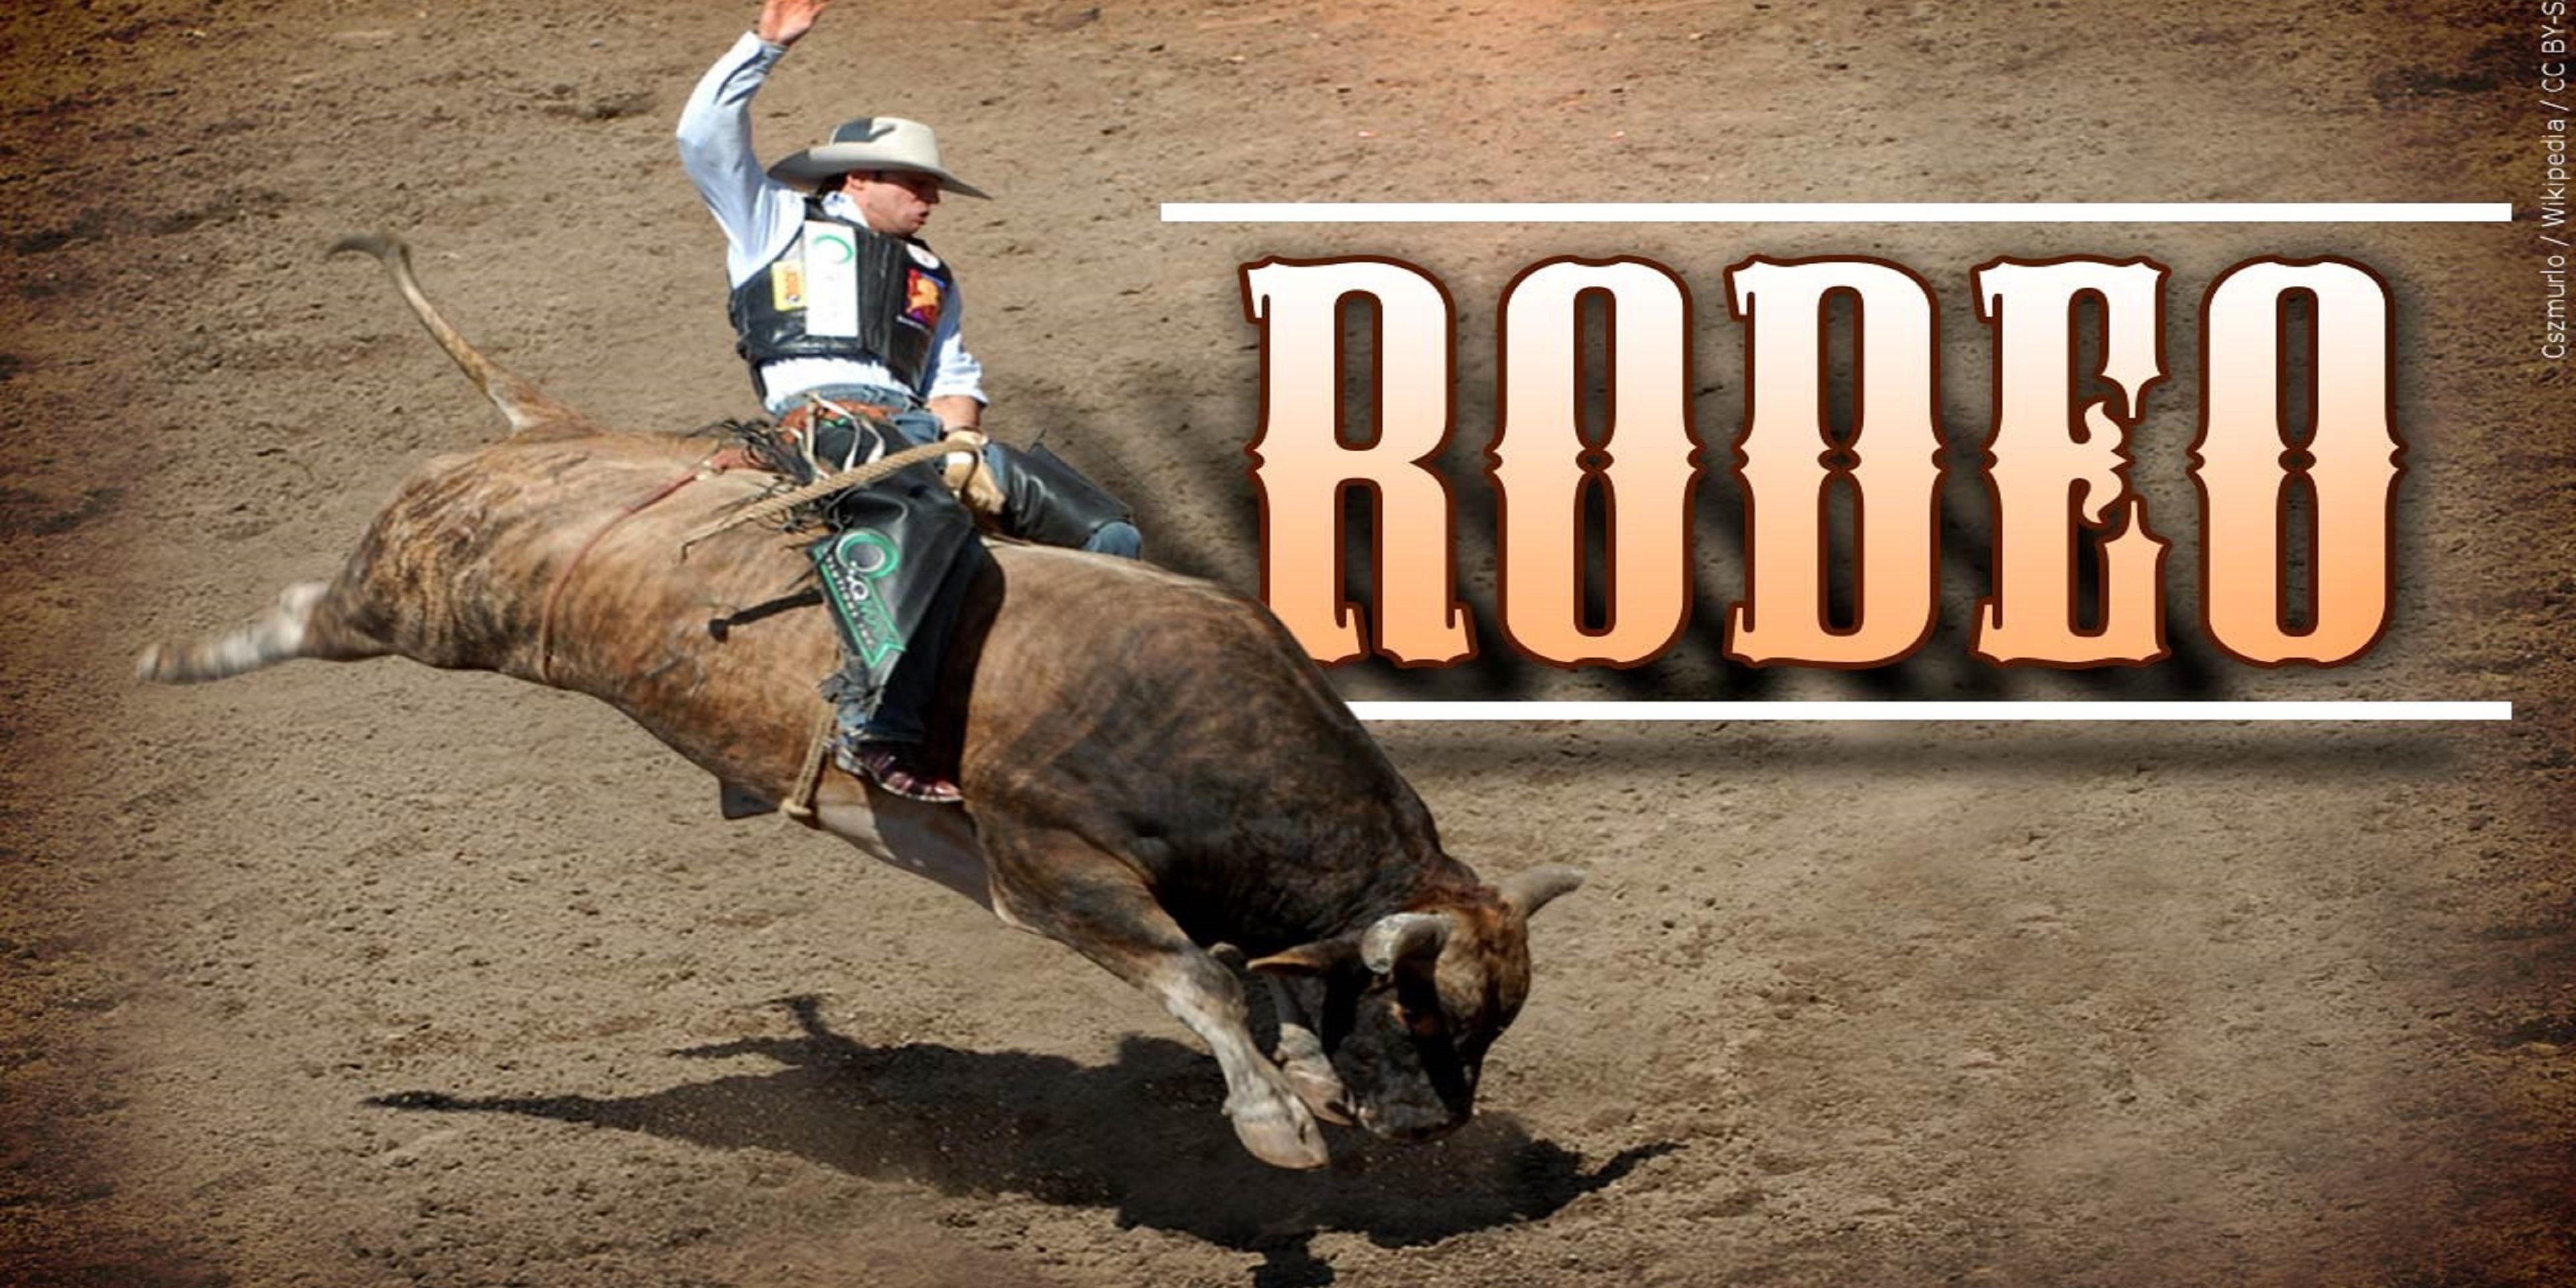 The Houston Livestock Show and Rodeo is the world's largest livestock show and richest regular-season rodeo dedicated to benefiting youth. 